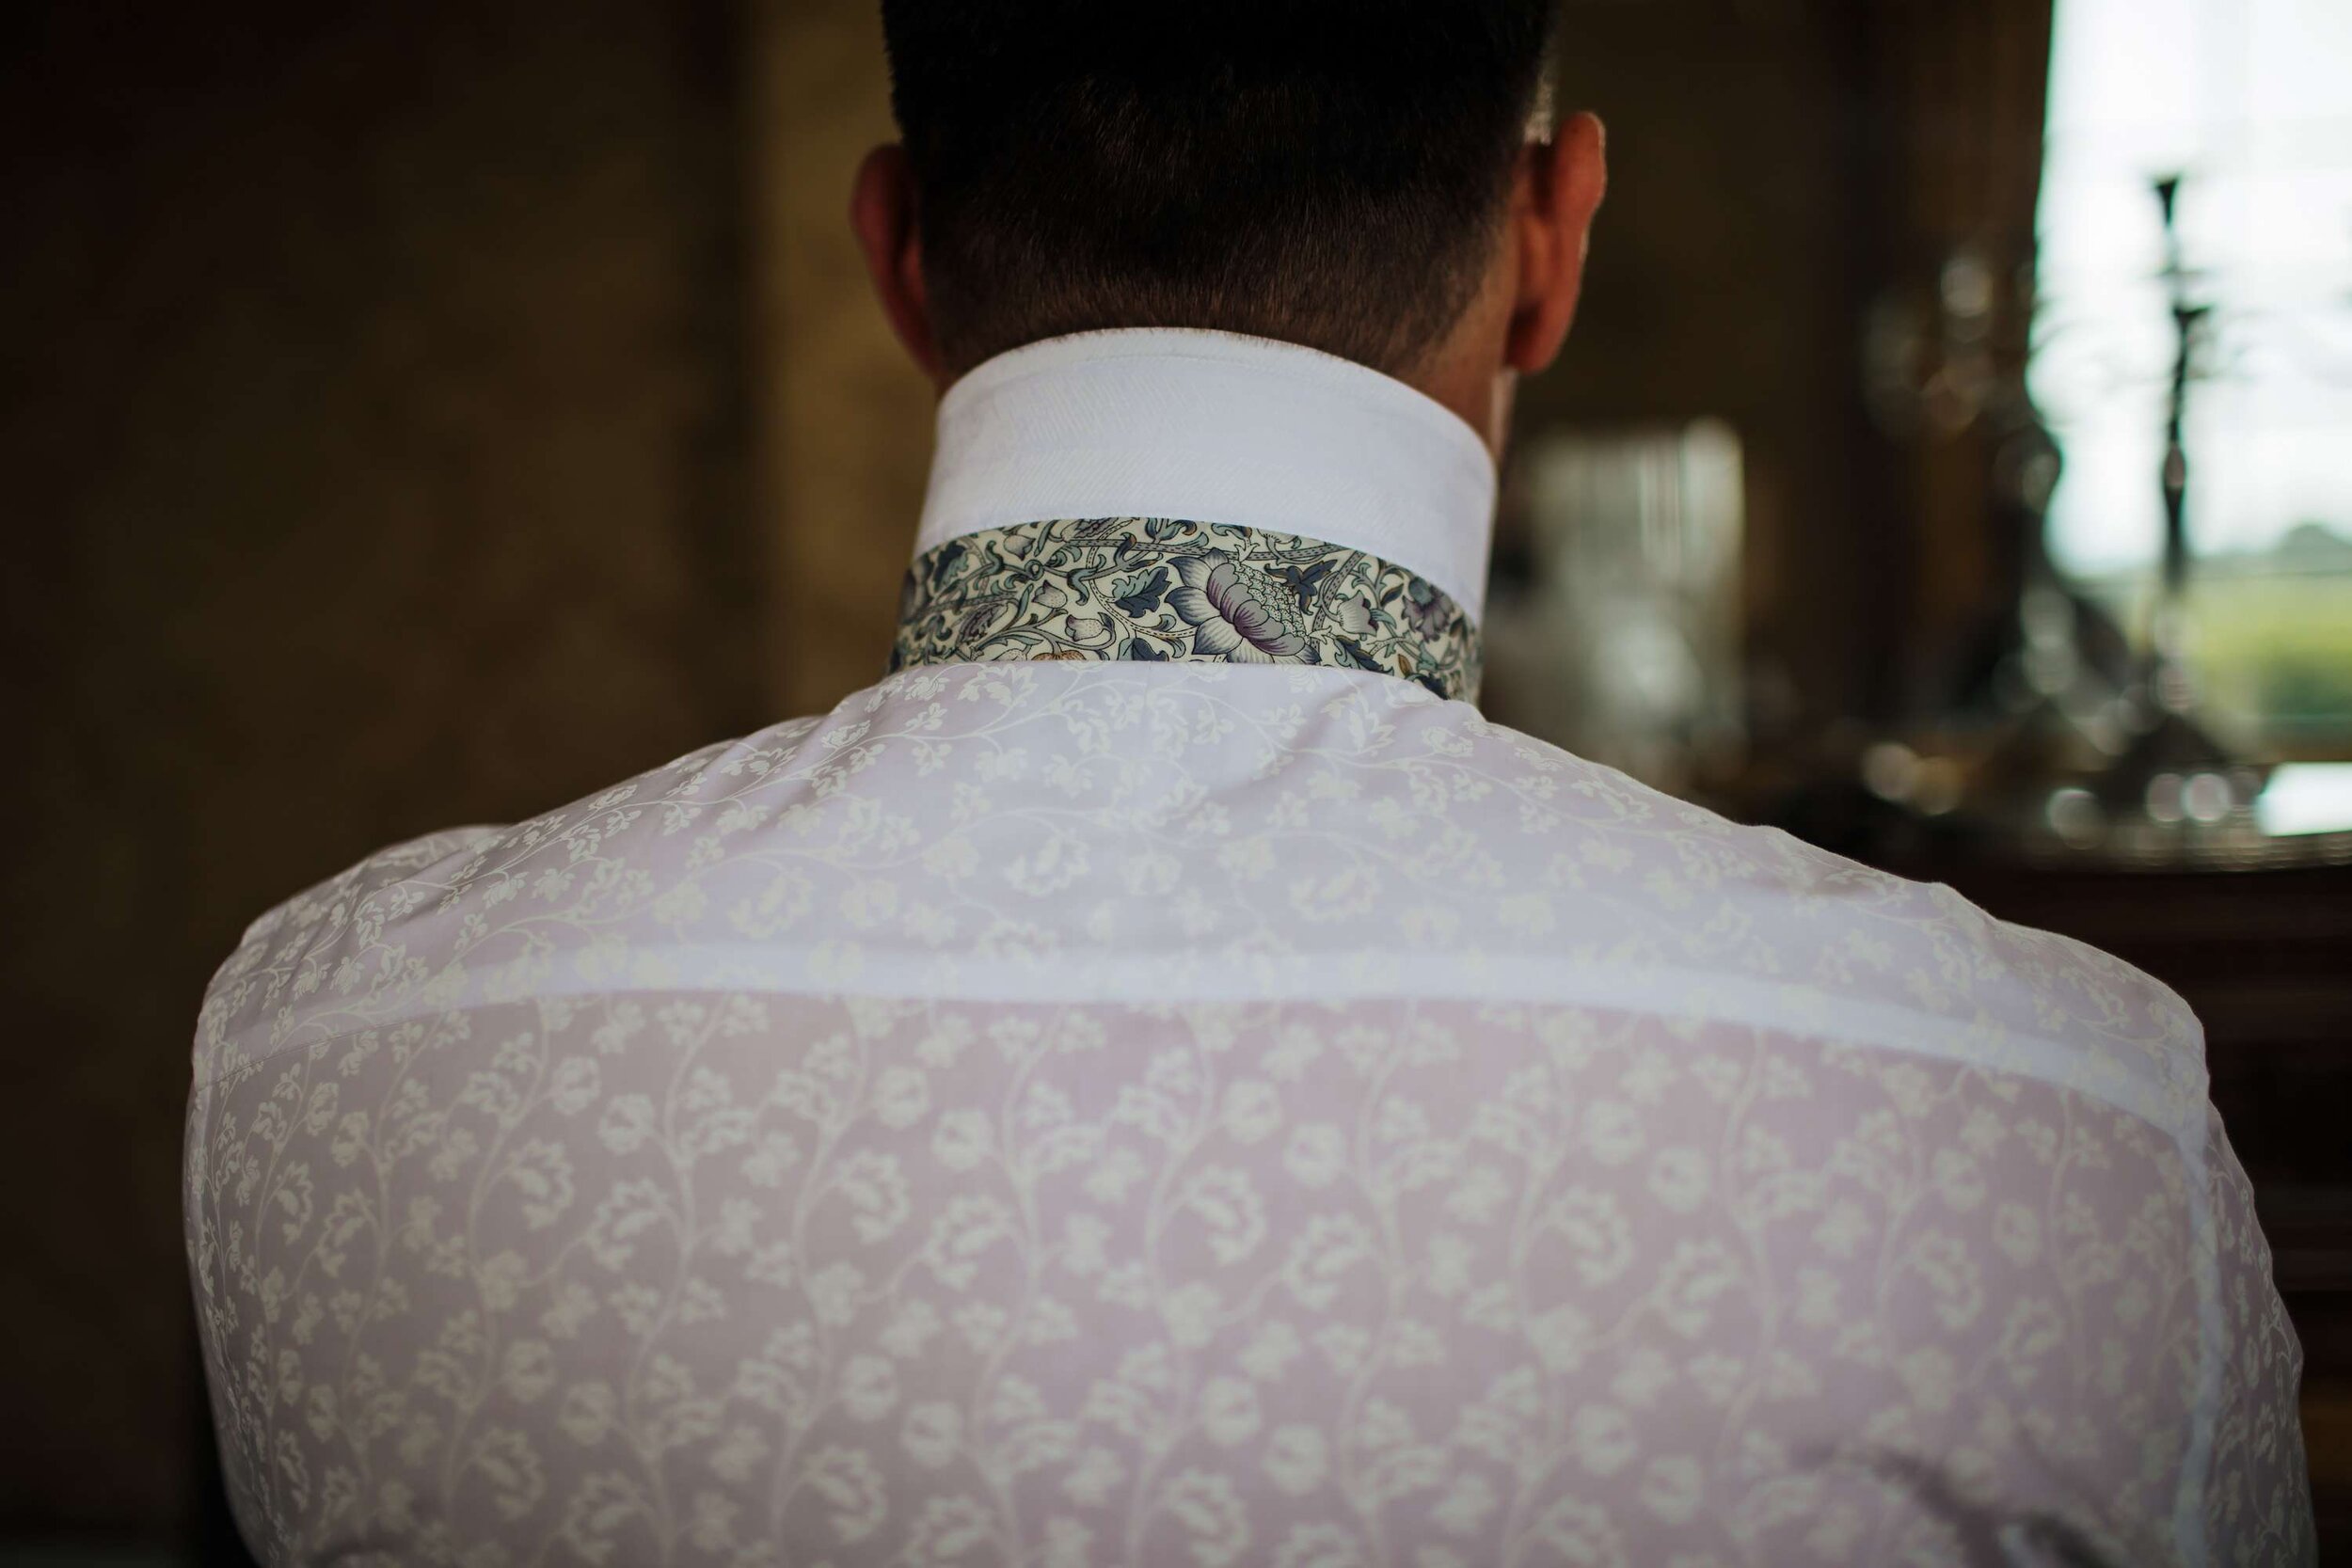 Close up of the groom's patterned shirt at his wedding